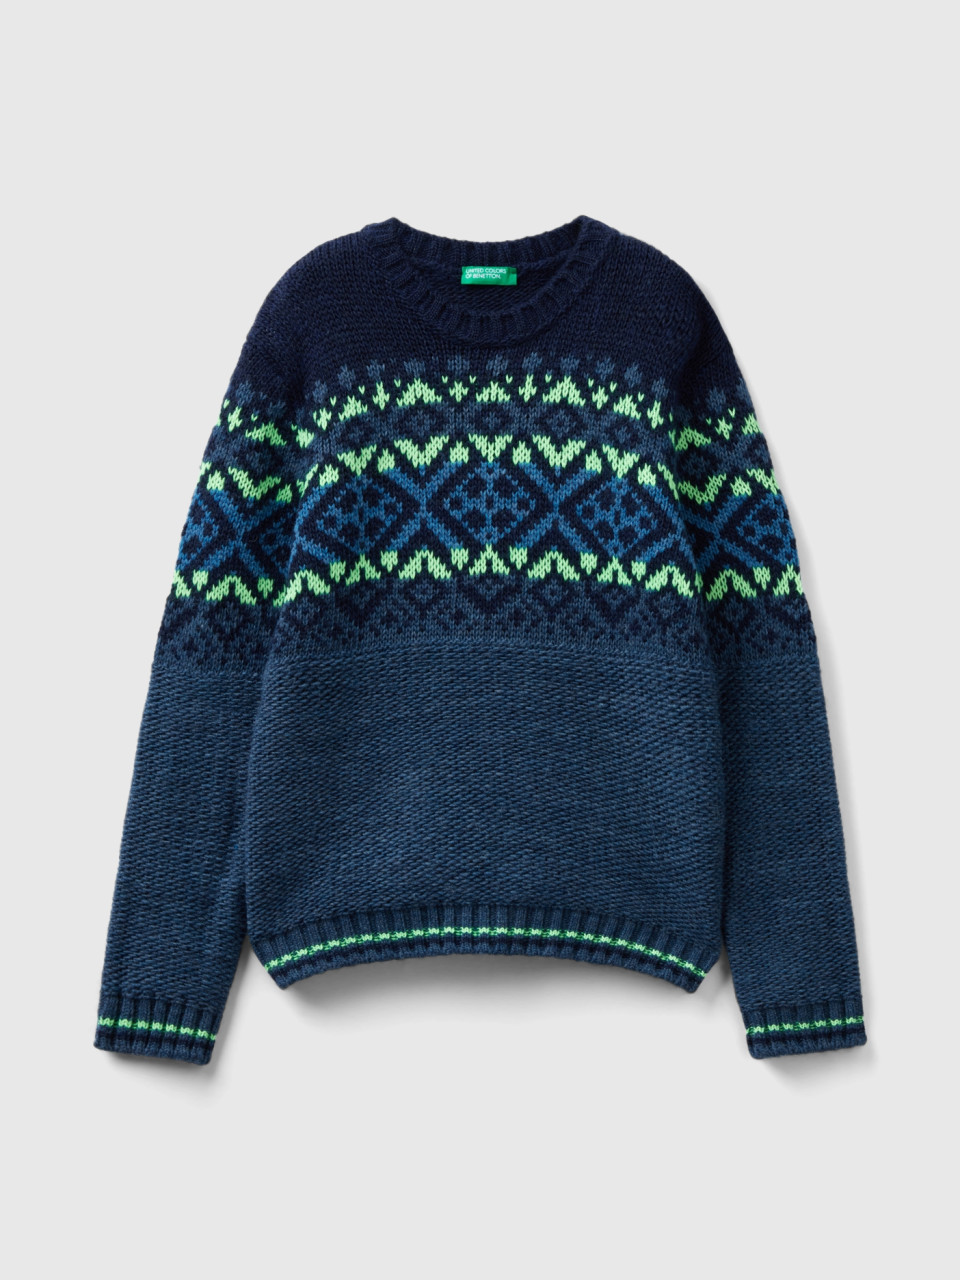 Benetton, Jacquard Sweater With Neon Details, Multi-color, Kids